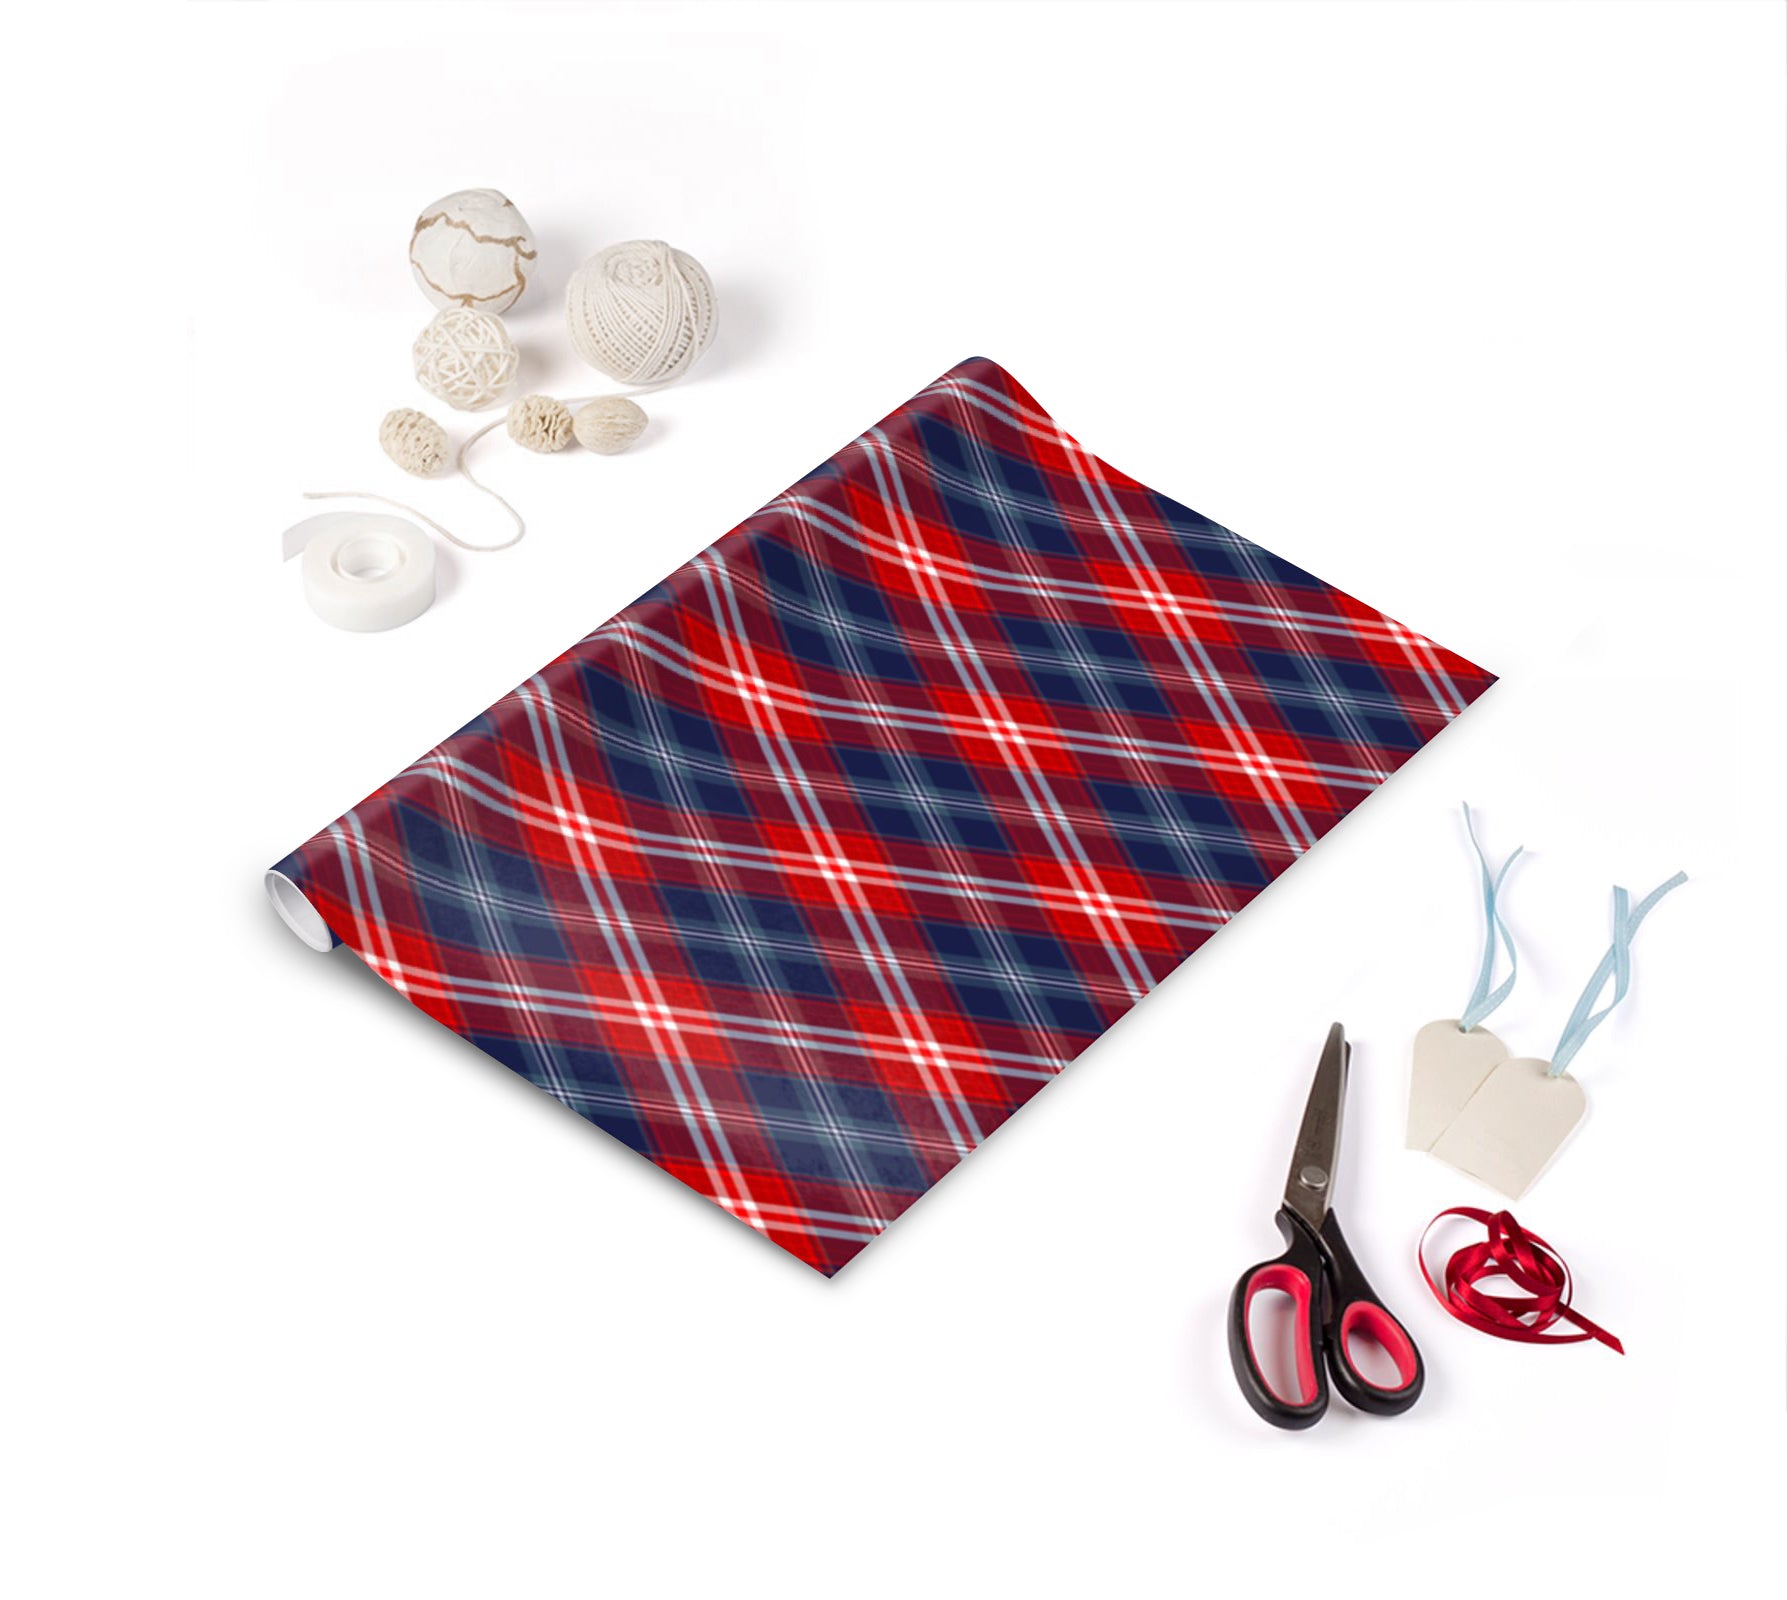 Designer wrapping paper exclusive to the Tartan Artisan ®. Featuring the Star-Spangled Banner ® Tartan, created in 2021 to celebrate the Stars & Stripes of the United Stated of America